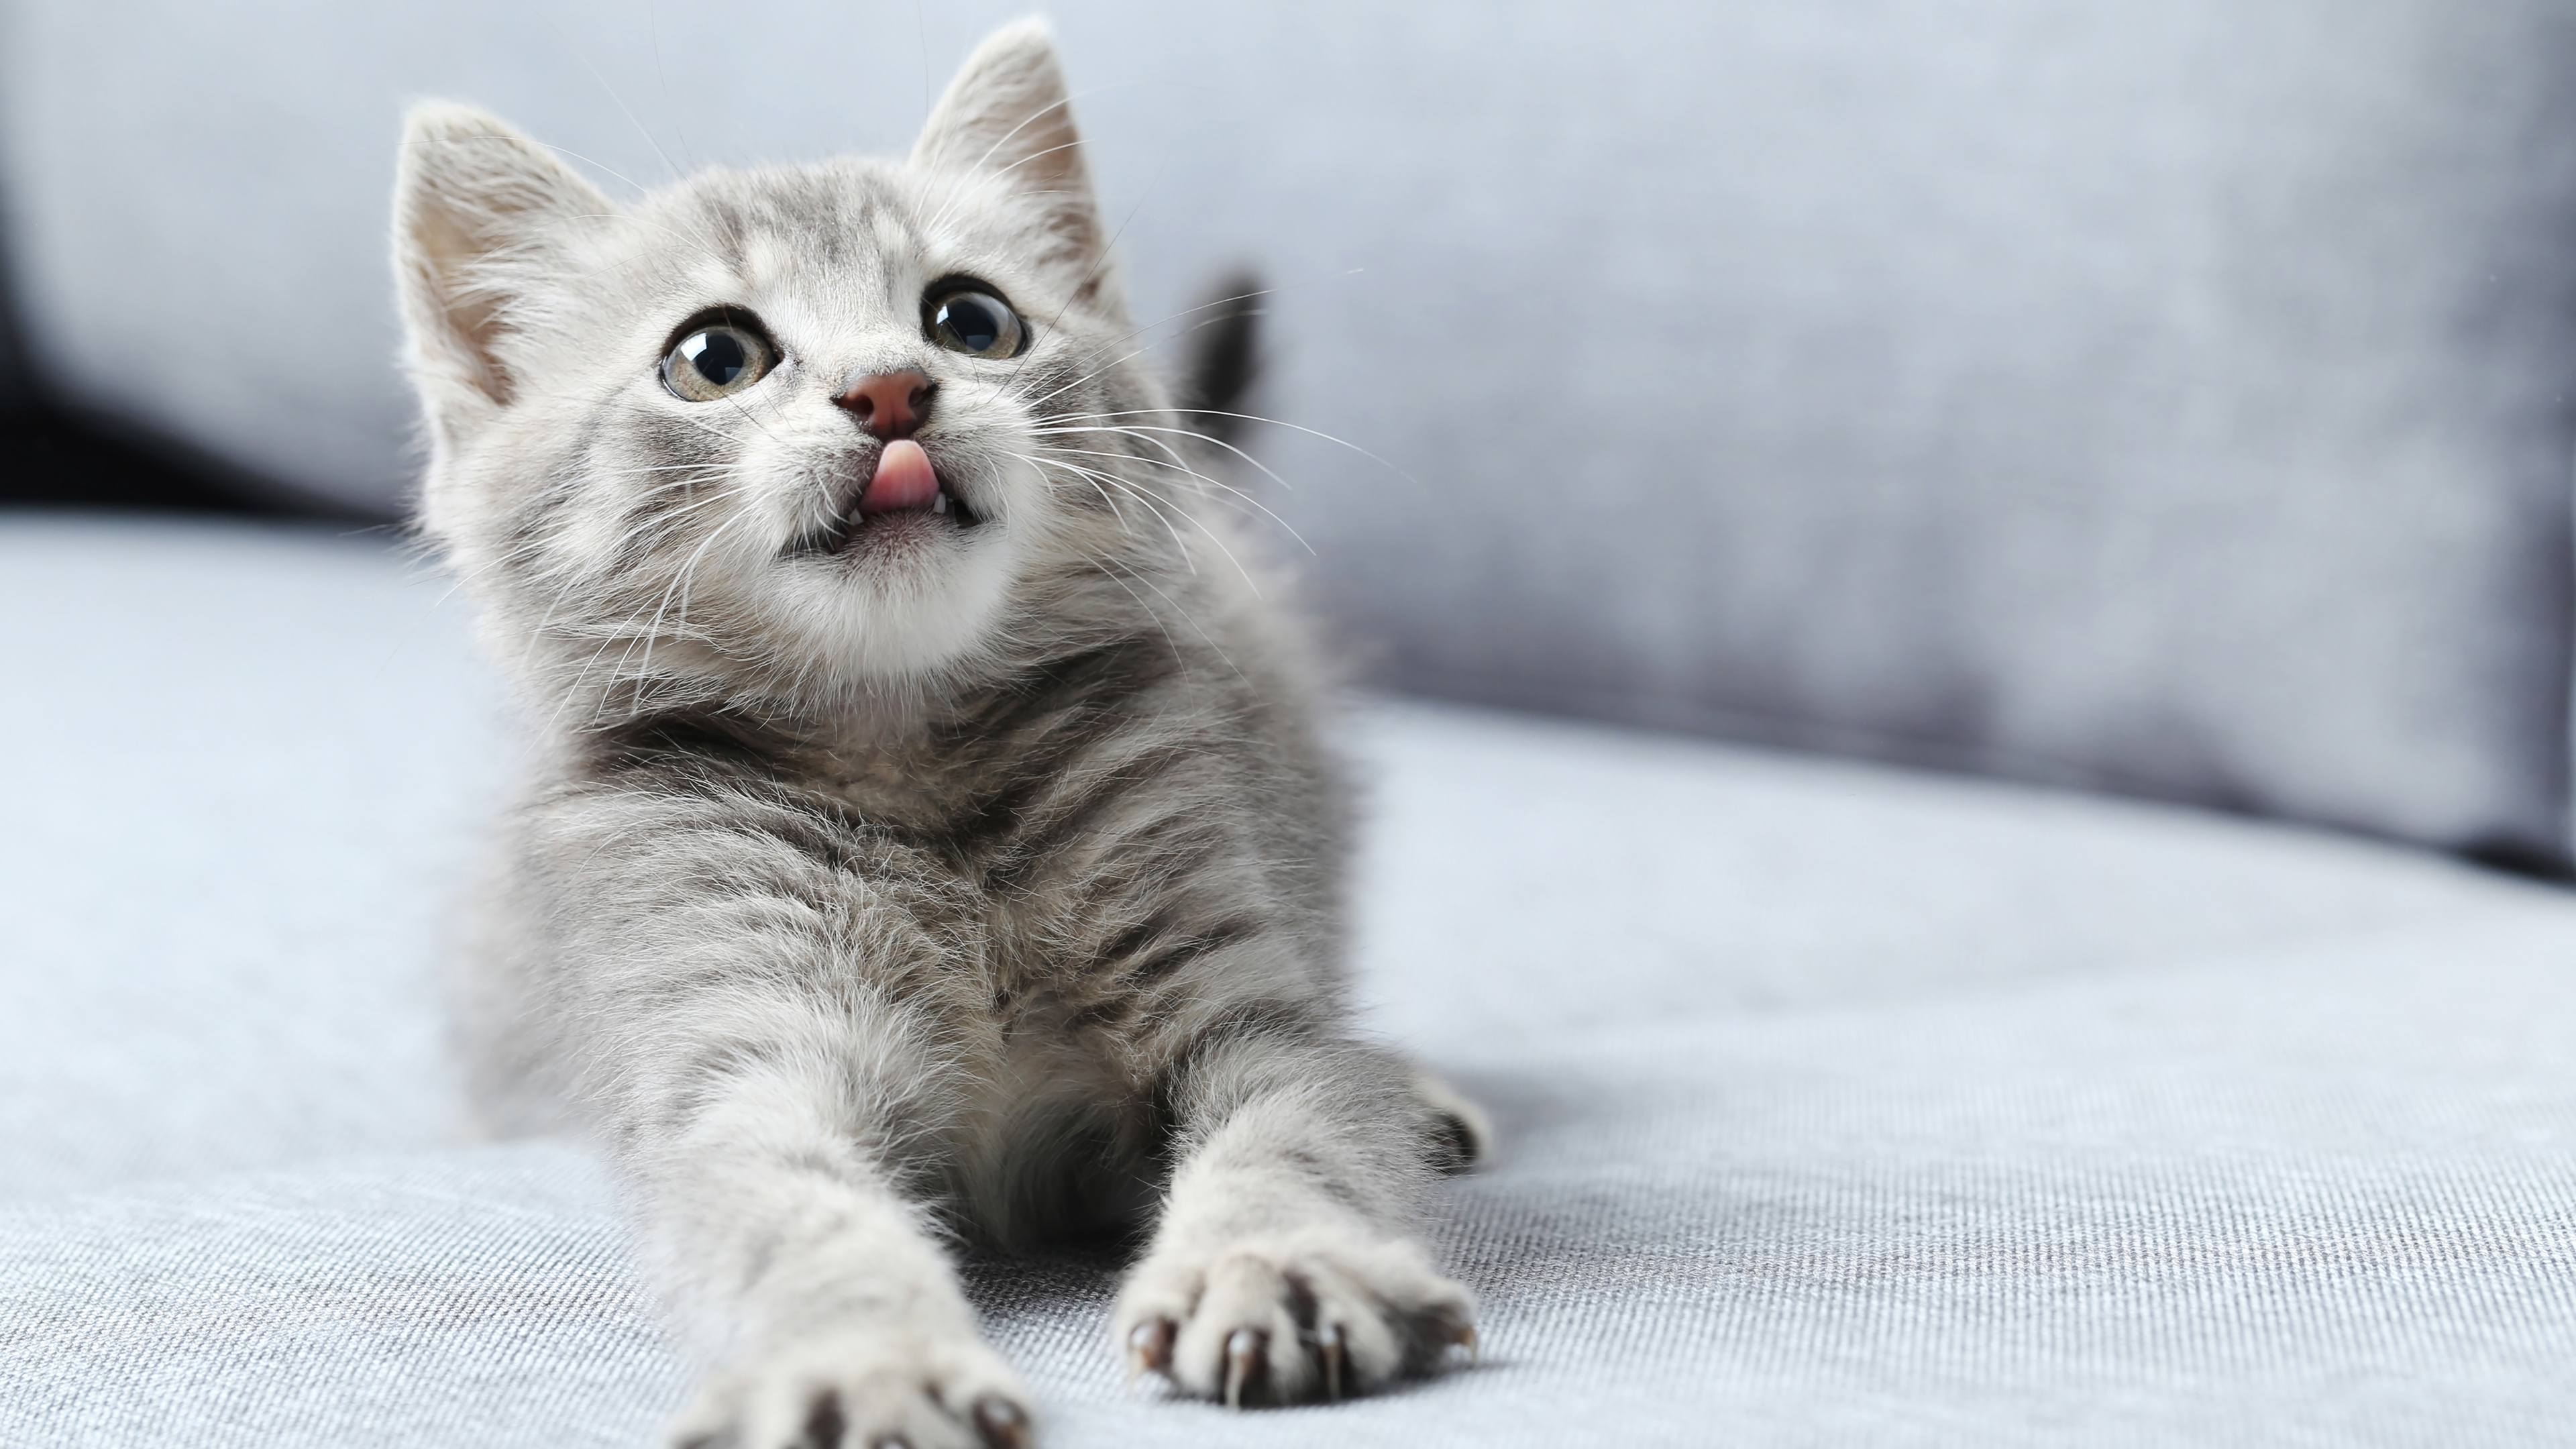 Cat with tongue out Wallpaper 4k Ultra HD